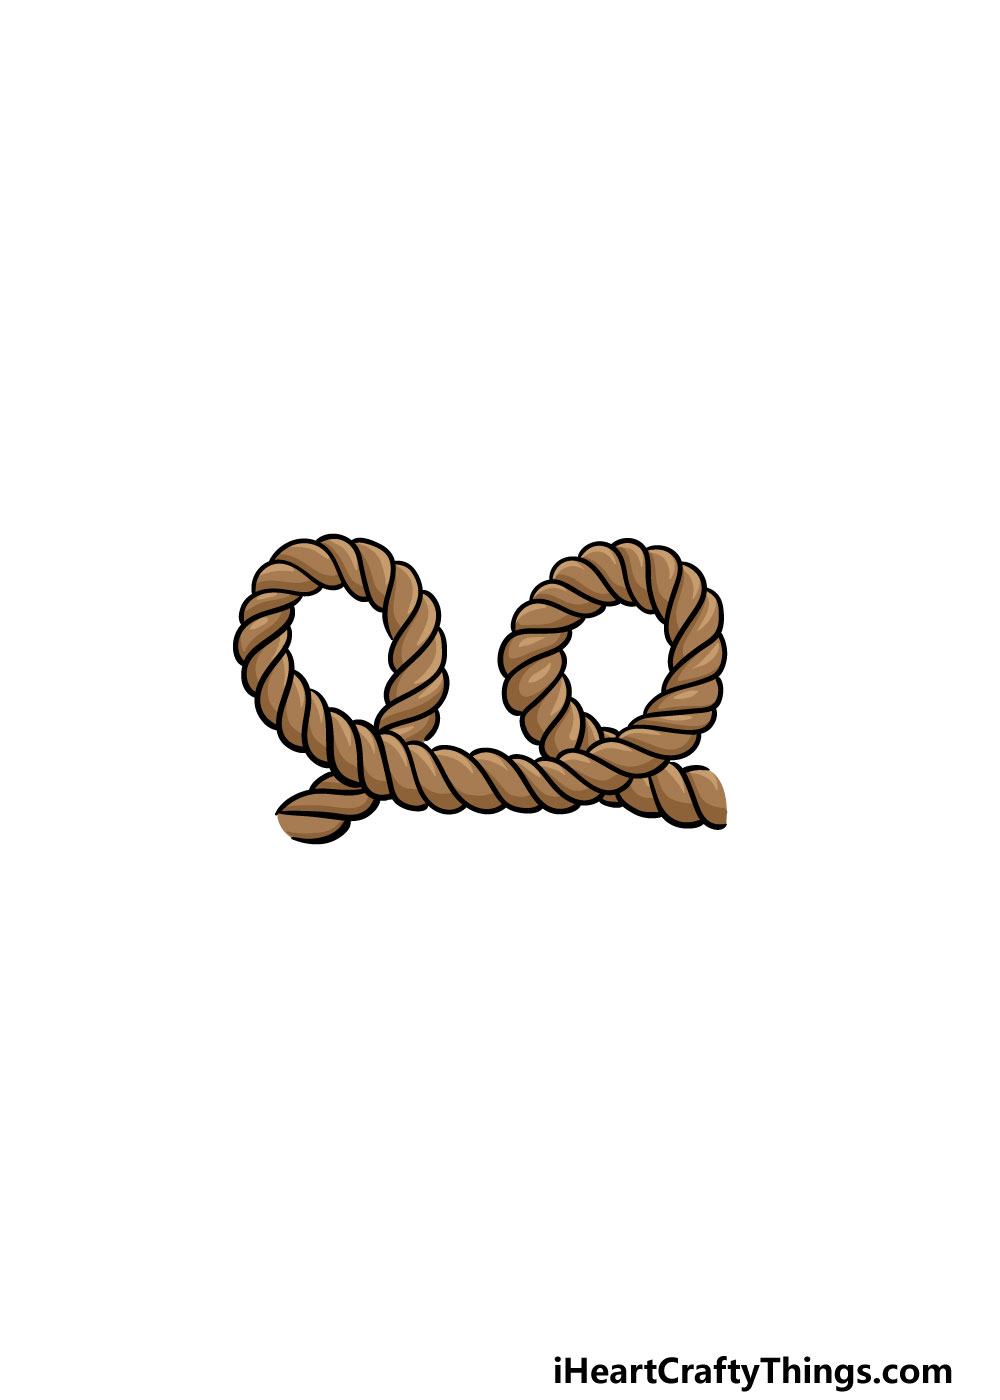 Rope Drawing How To Draw Rope Step By Step